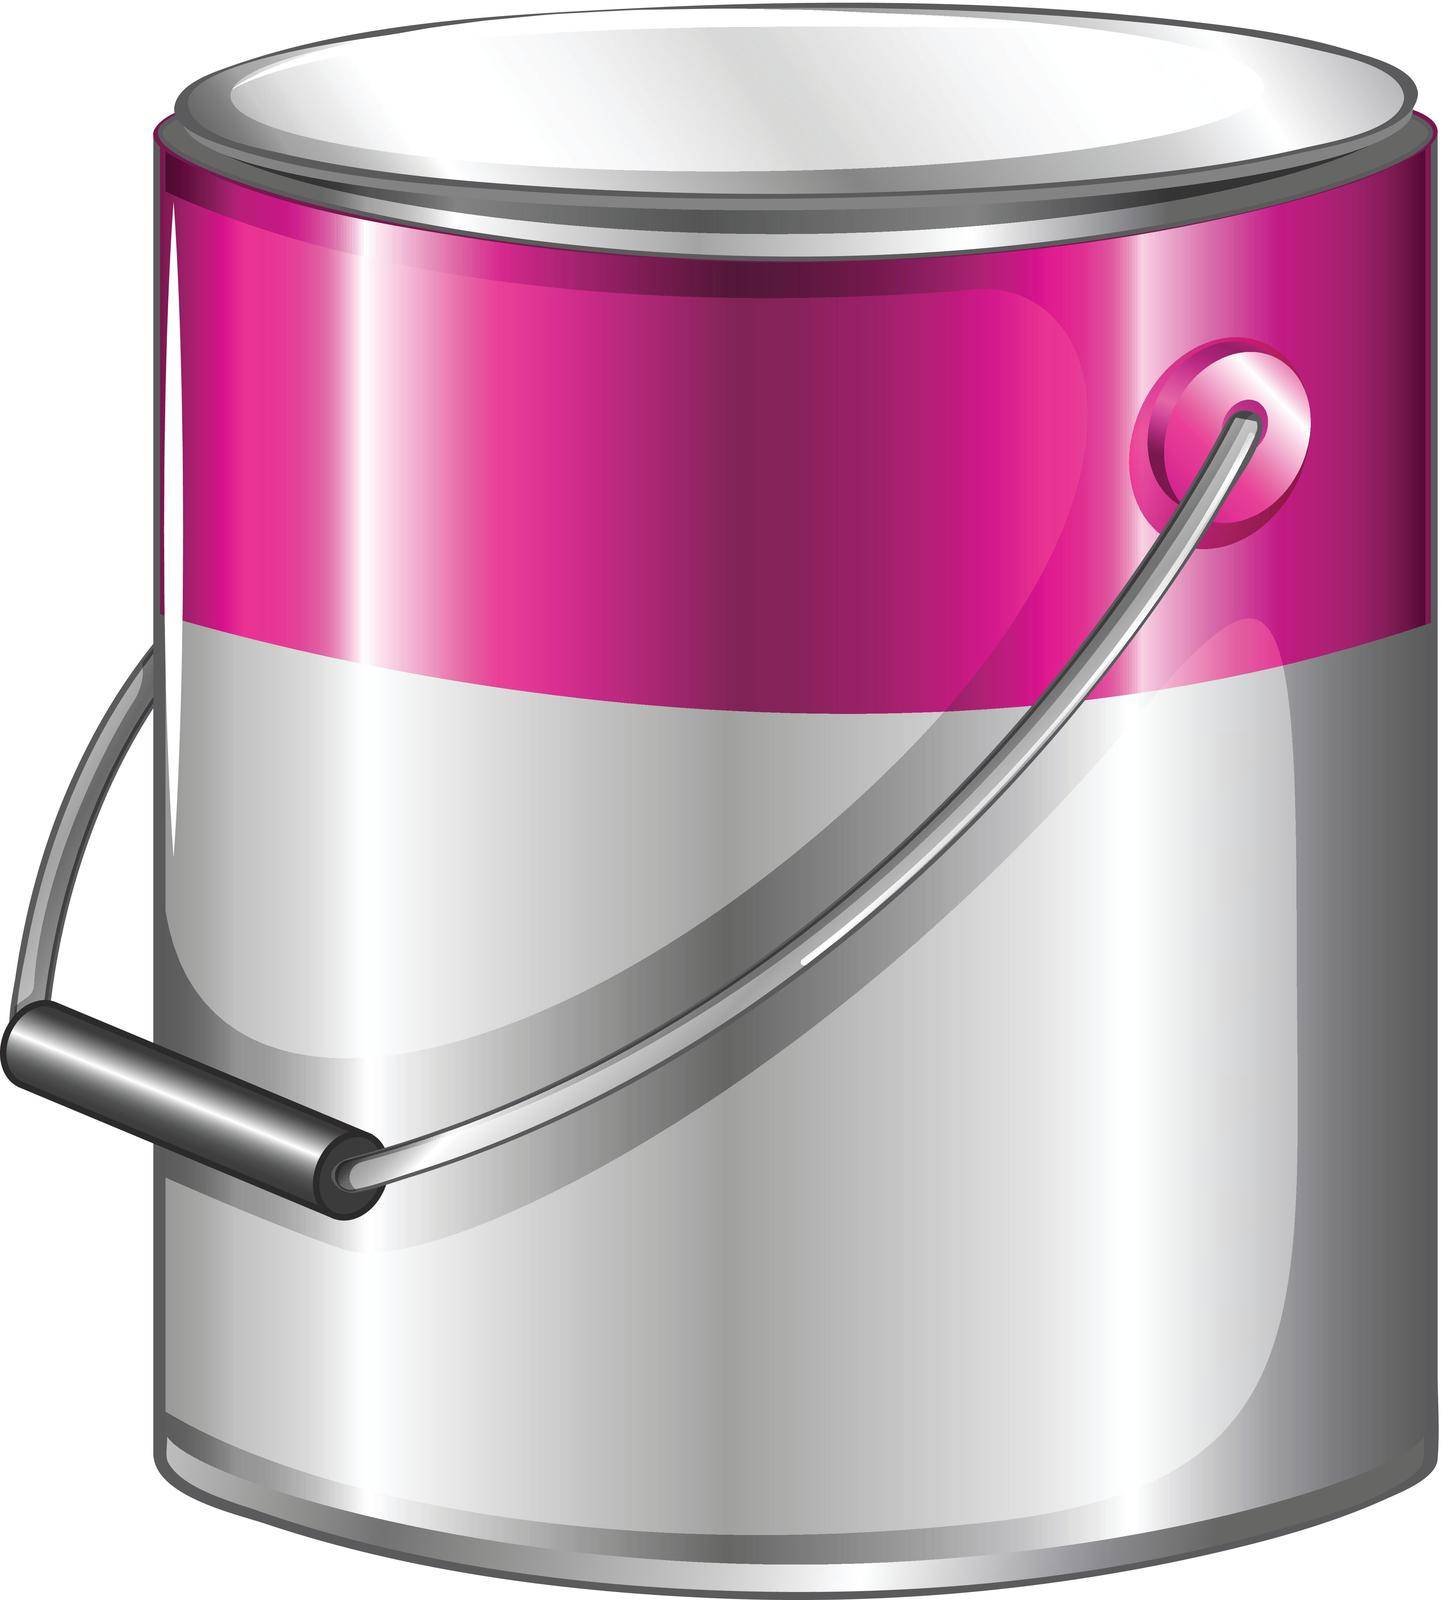 Illustration of a can of pink paint on a white background